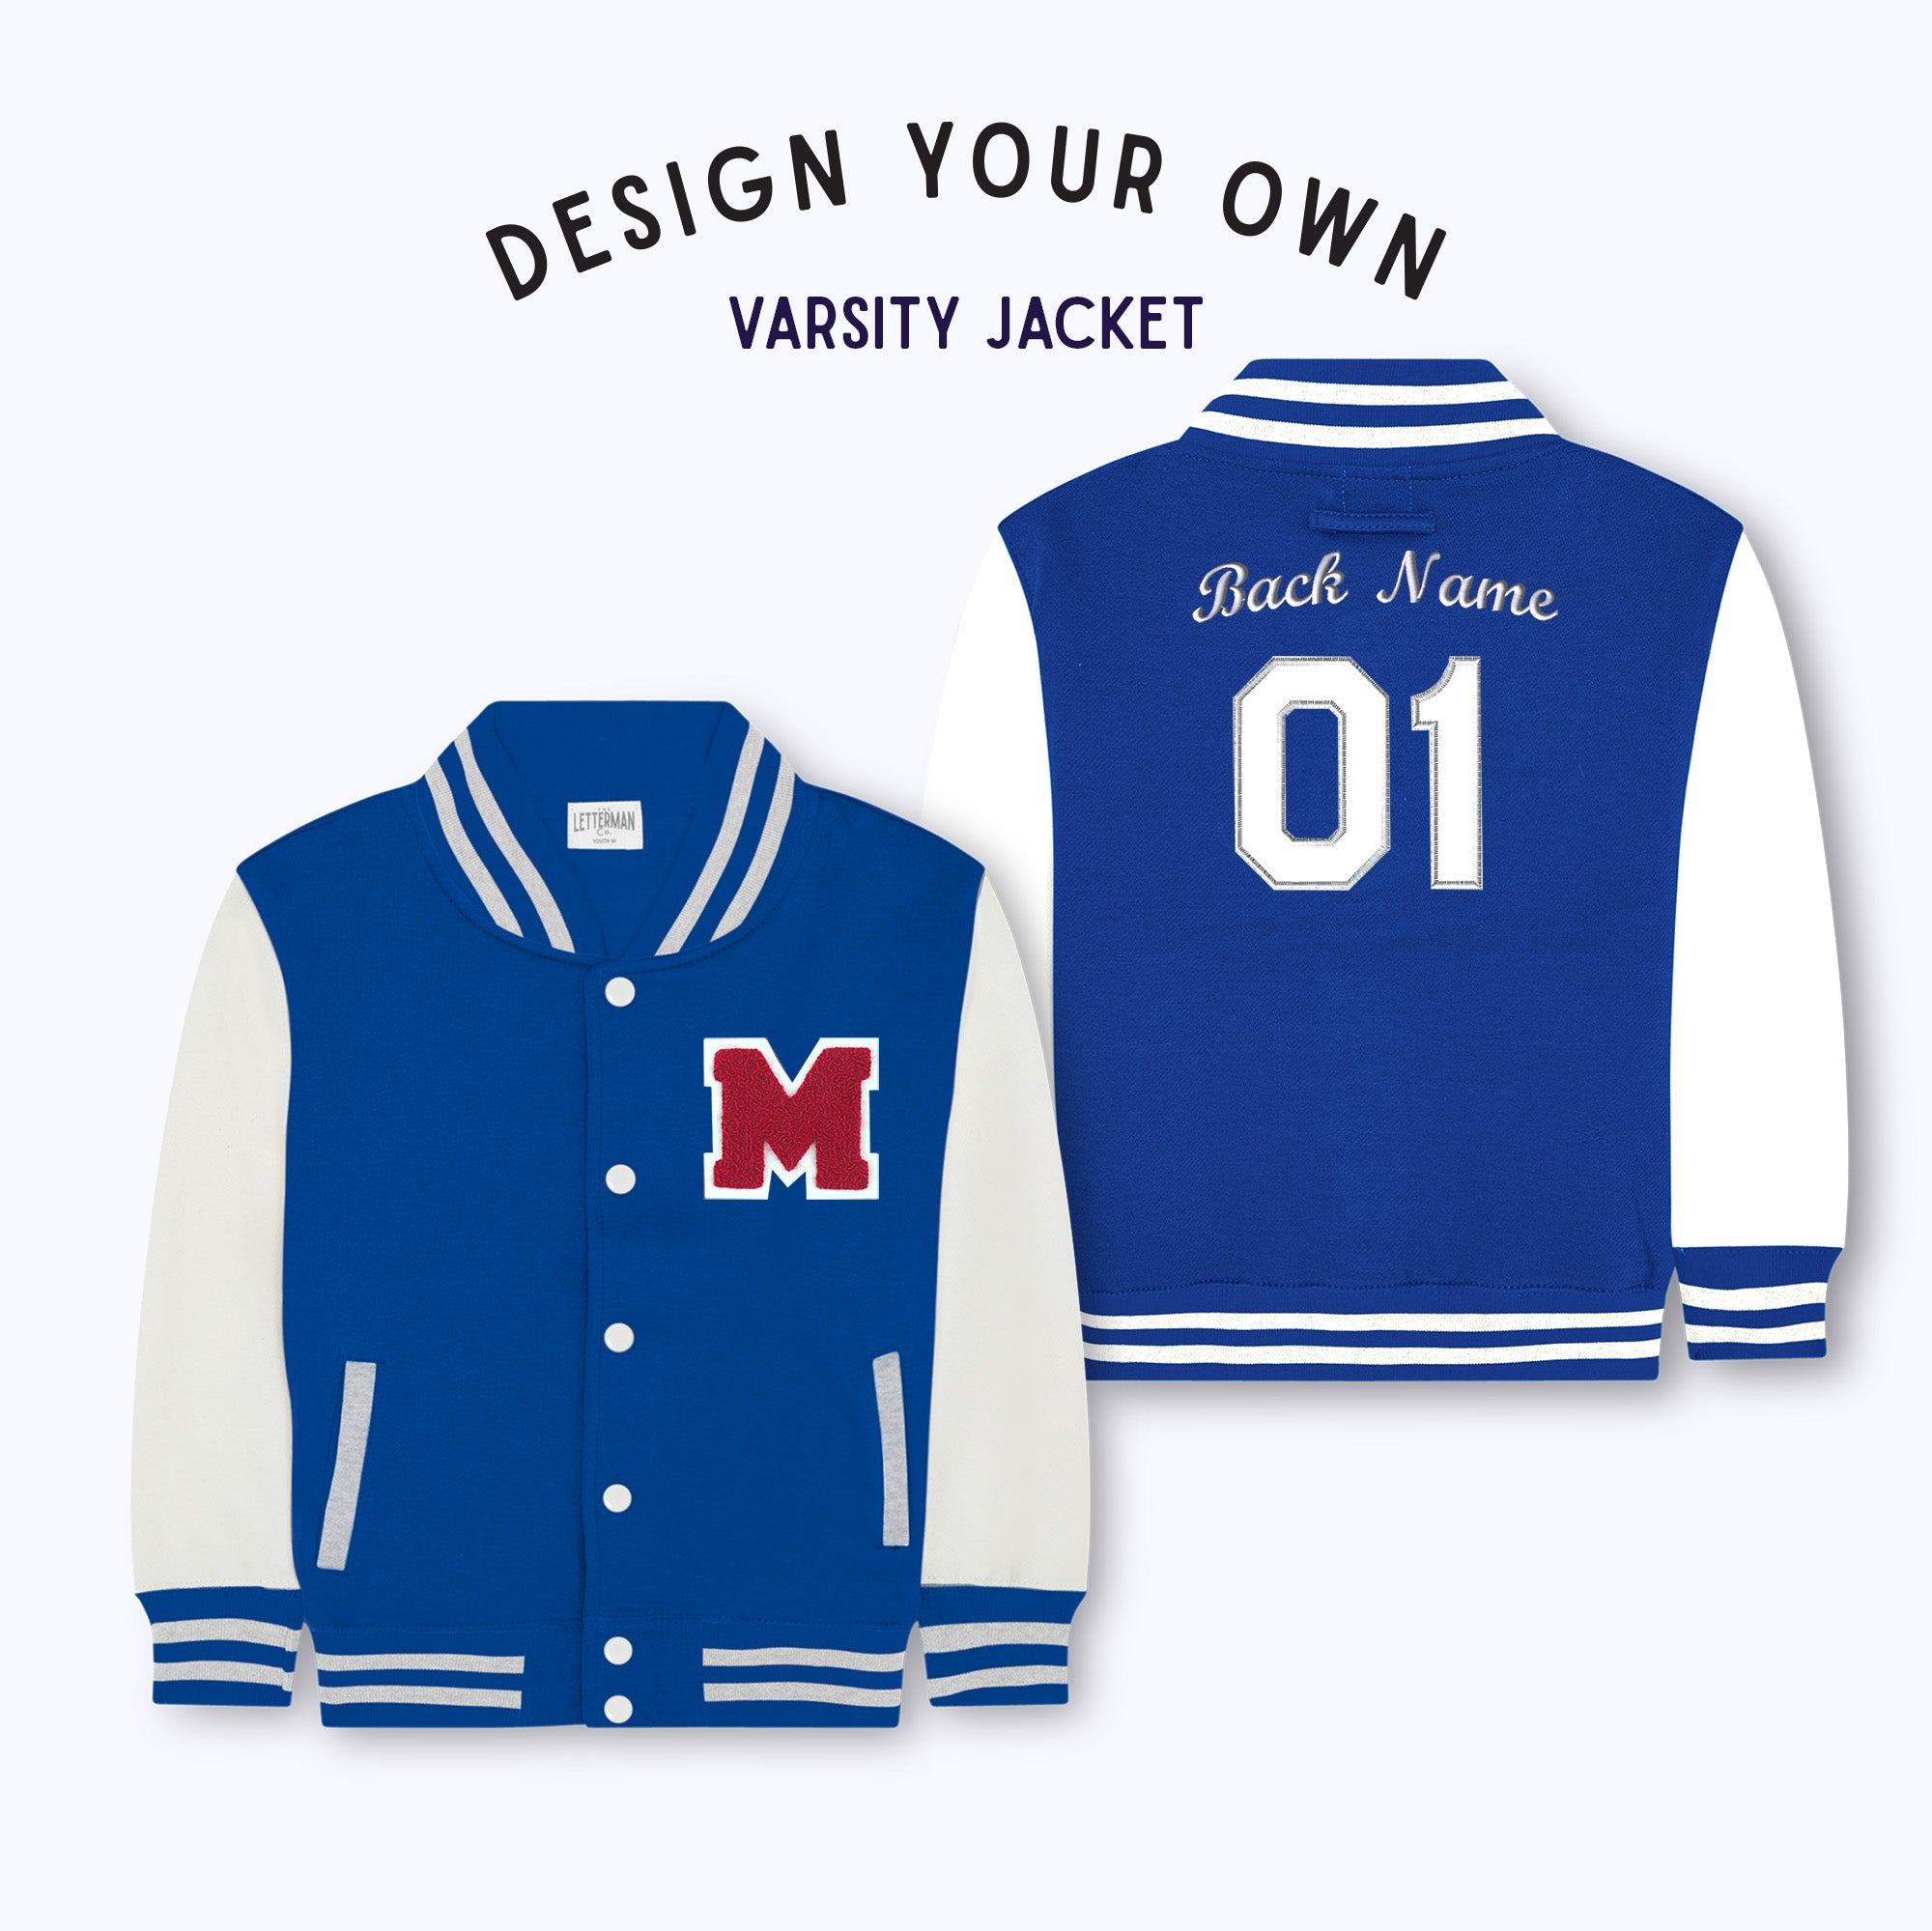 White and Navy Blue Letterman G Jacket